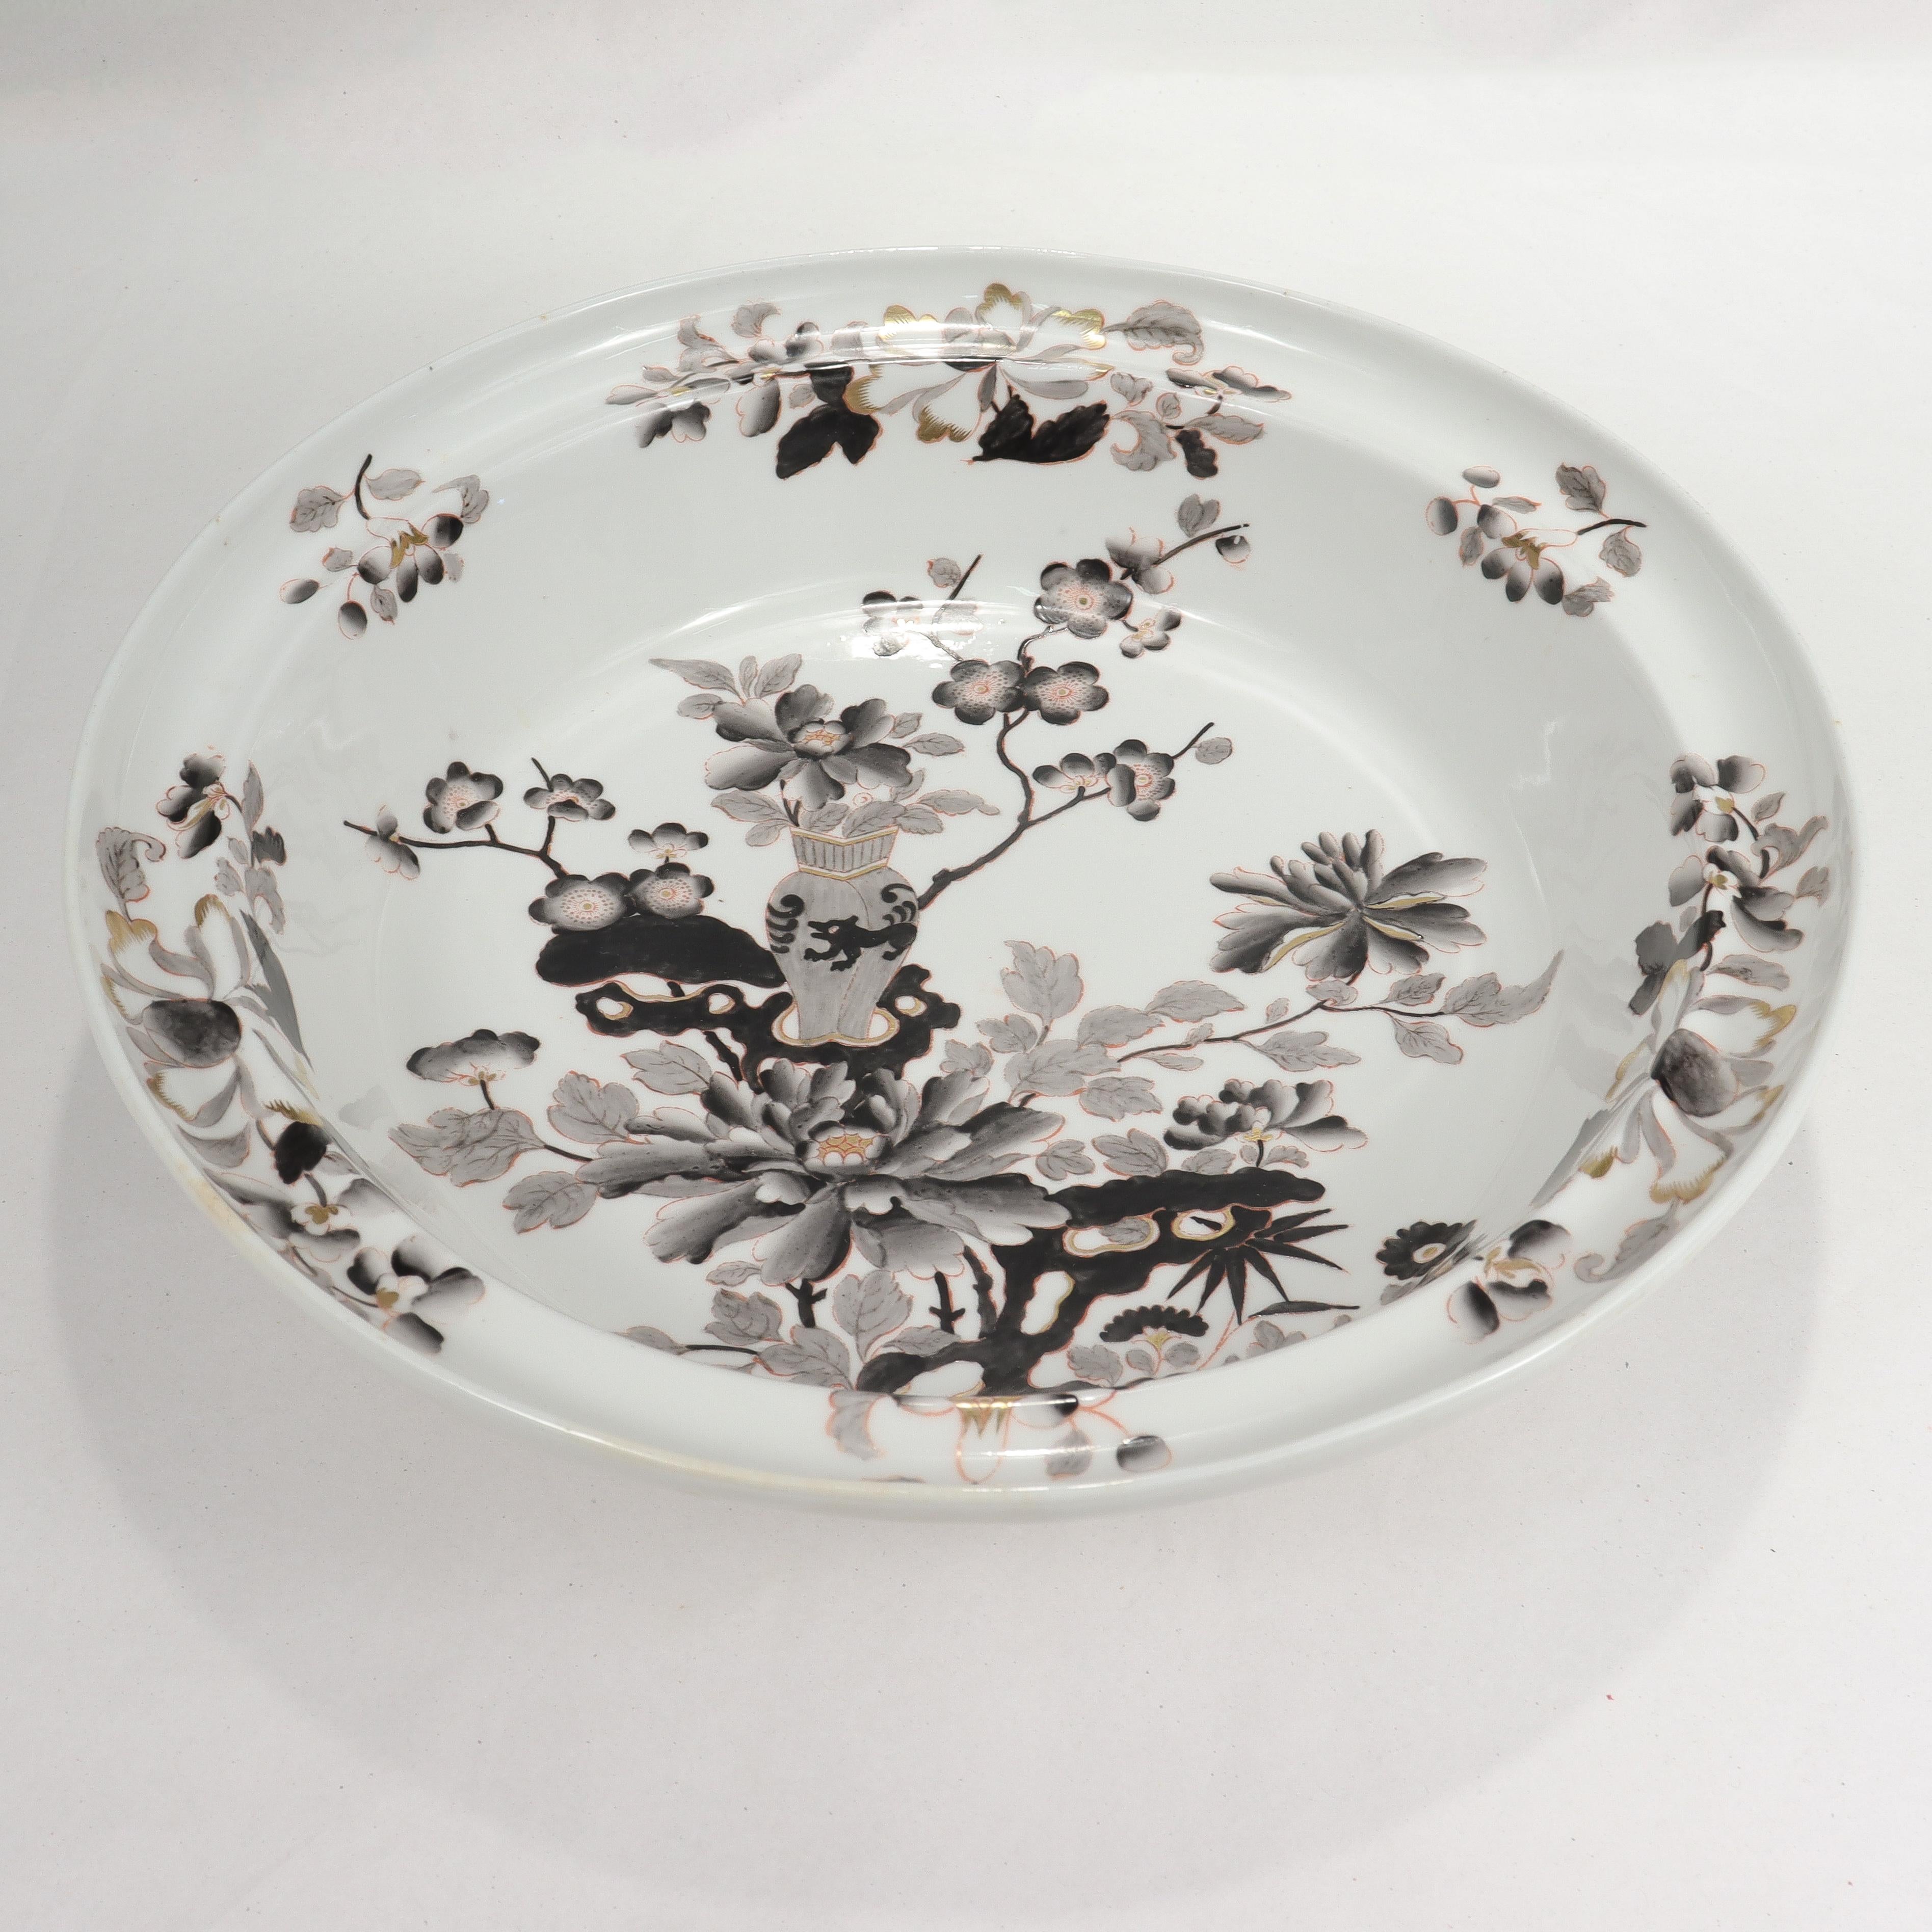 A fine antique English porcelain bowl or basin.

Attributed to Worcester. 

Decorated throughout with grey and black floral Chinoserie decoration with gilt highlights.

With a few paper labels to the base - an antique one that reads